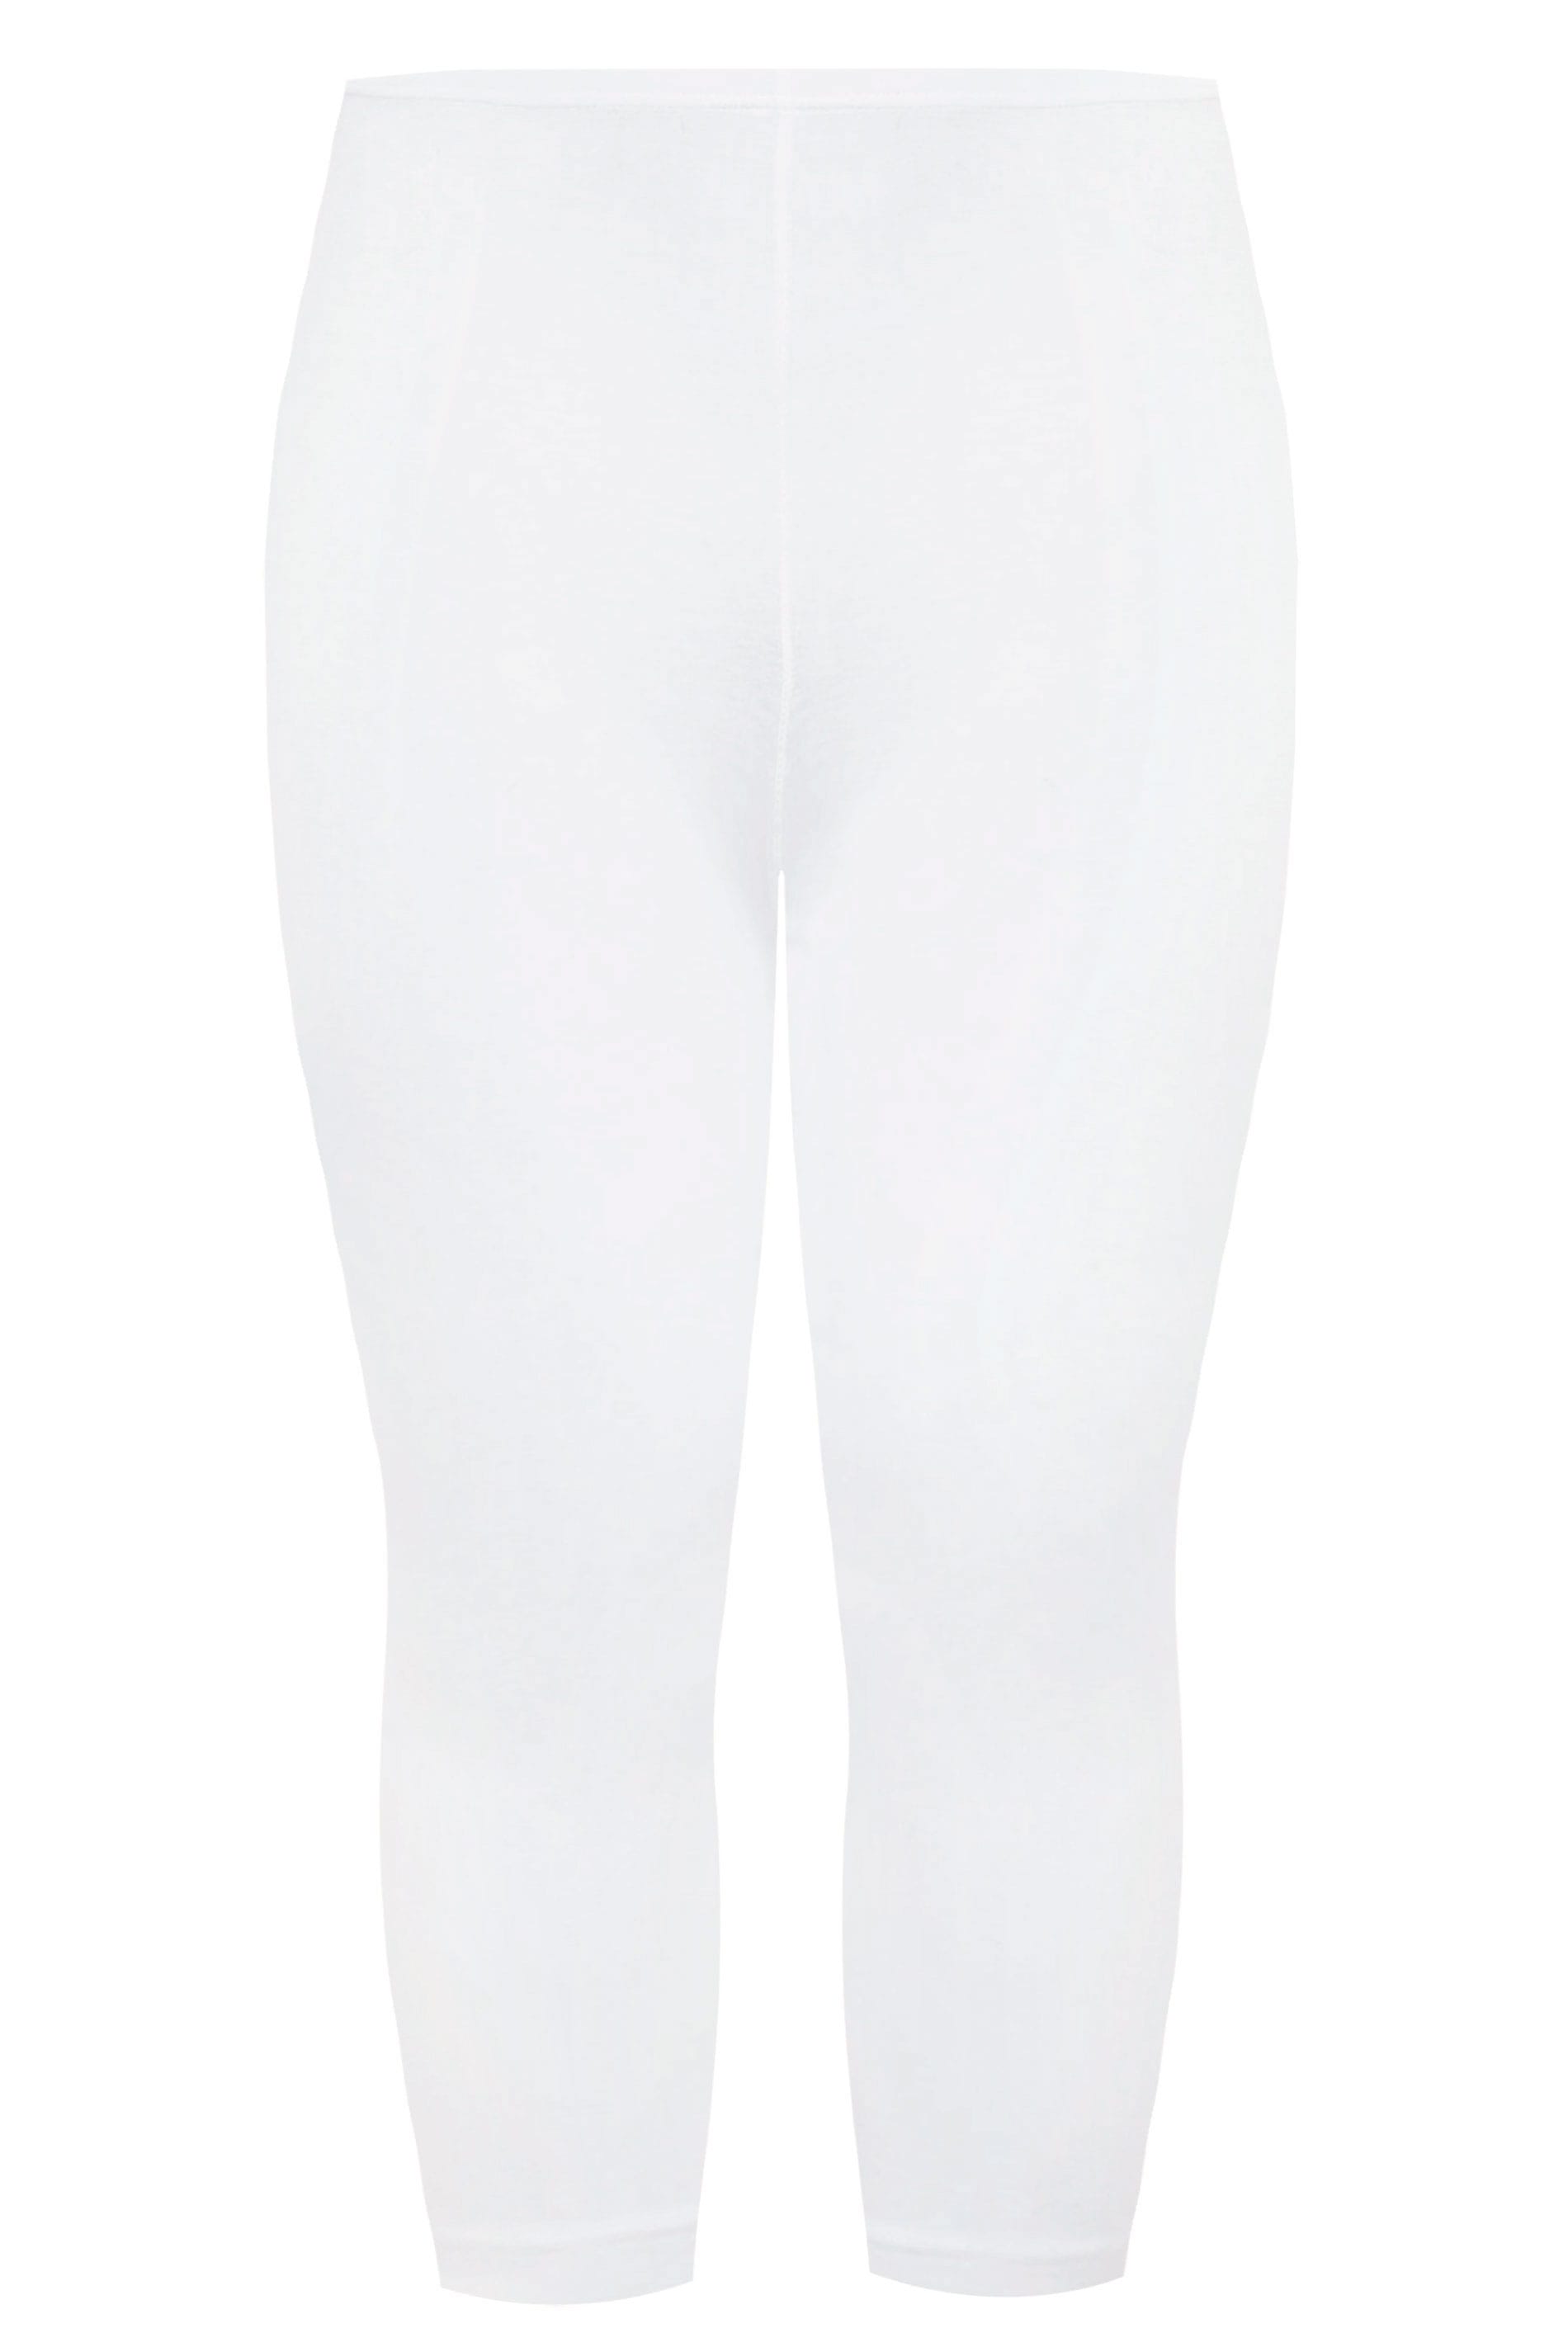 Plus Size YOURS FOR GOOD White Cotton Essential Cropped Leggings